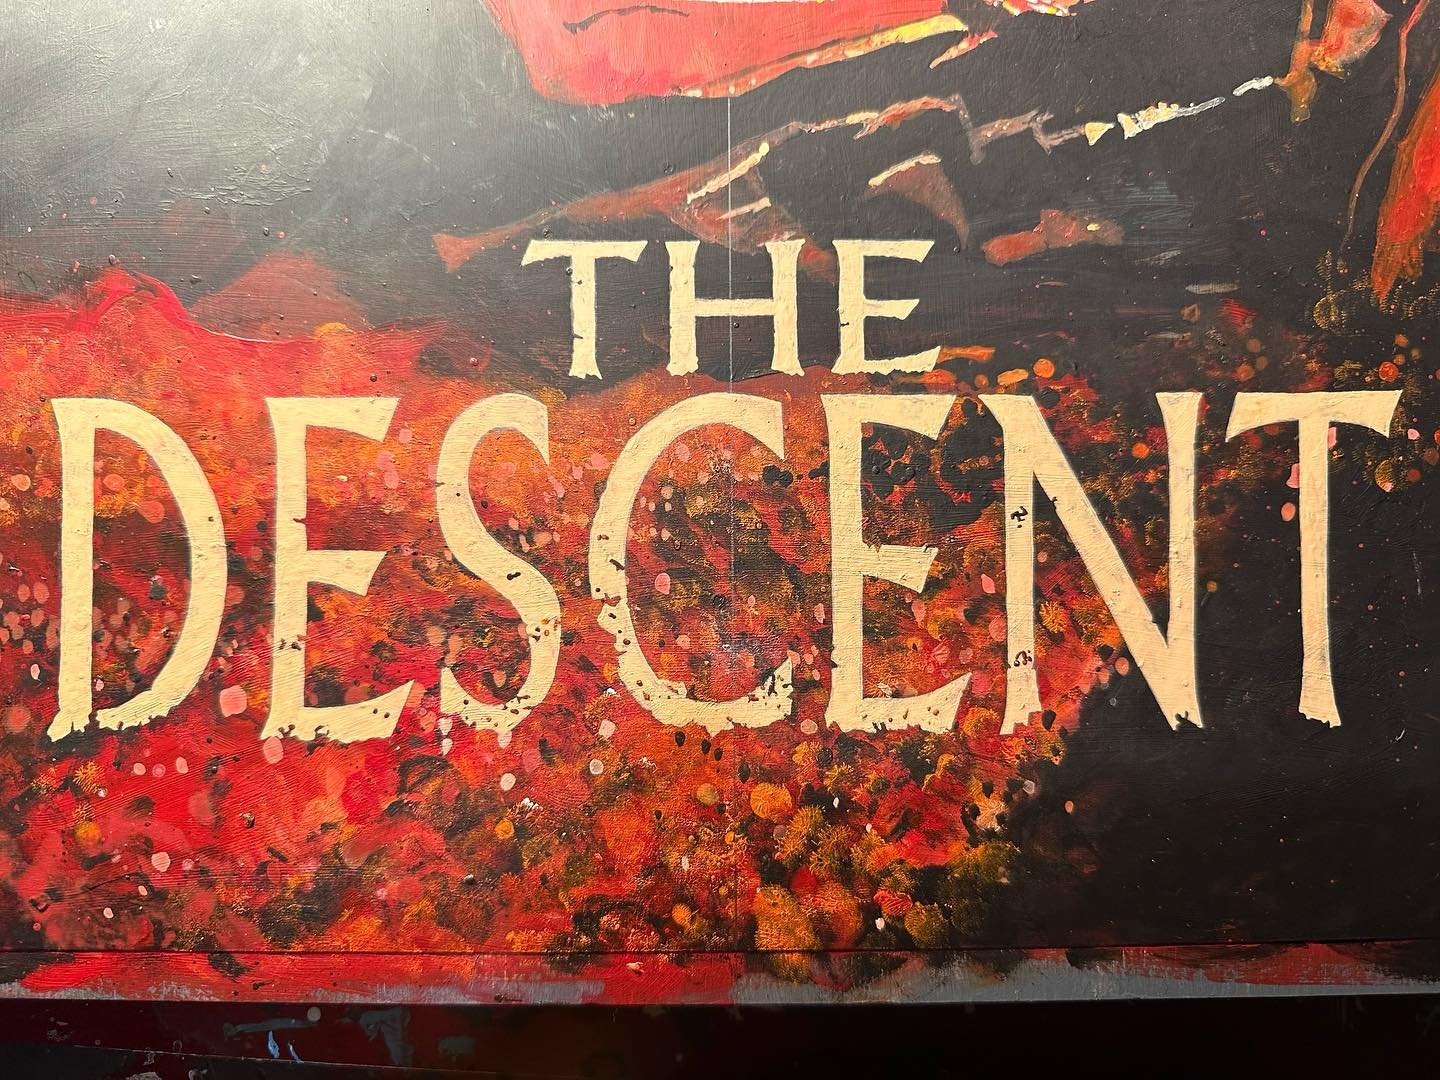 I&rsquo;ve been working on a painting for The Descent, excited to show it! Such a great horror movie! 

#thedescent #horrorfilm #horrorfan #thedescentmovie #modernhorror #scarymovies #alternativemovieposters #horroraddict #horrorart #descent #horrorf